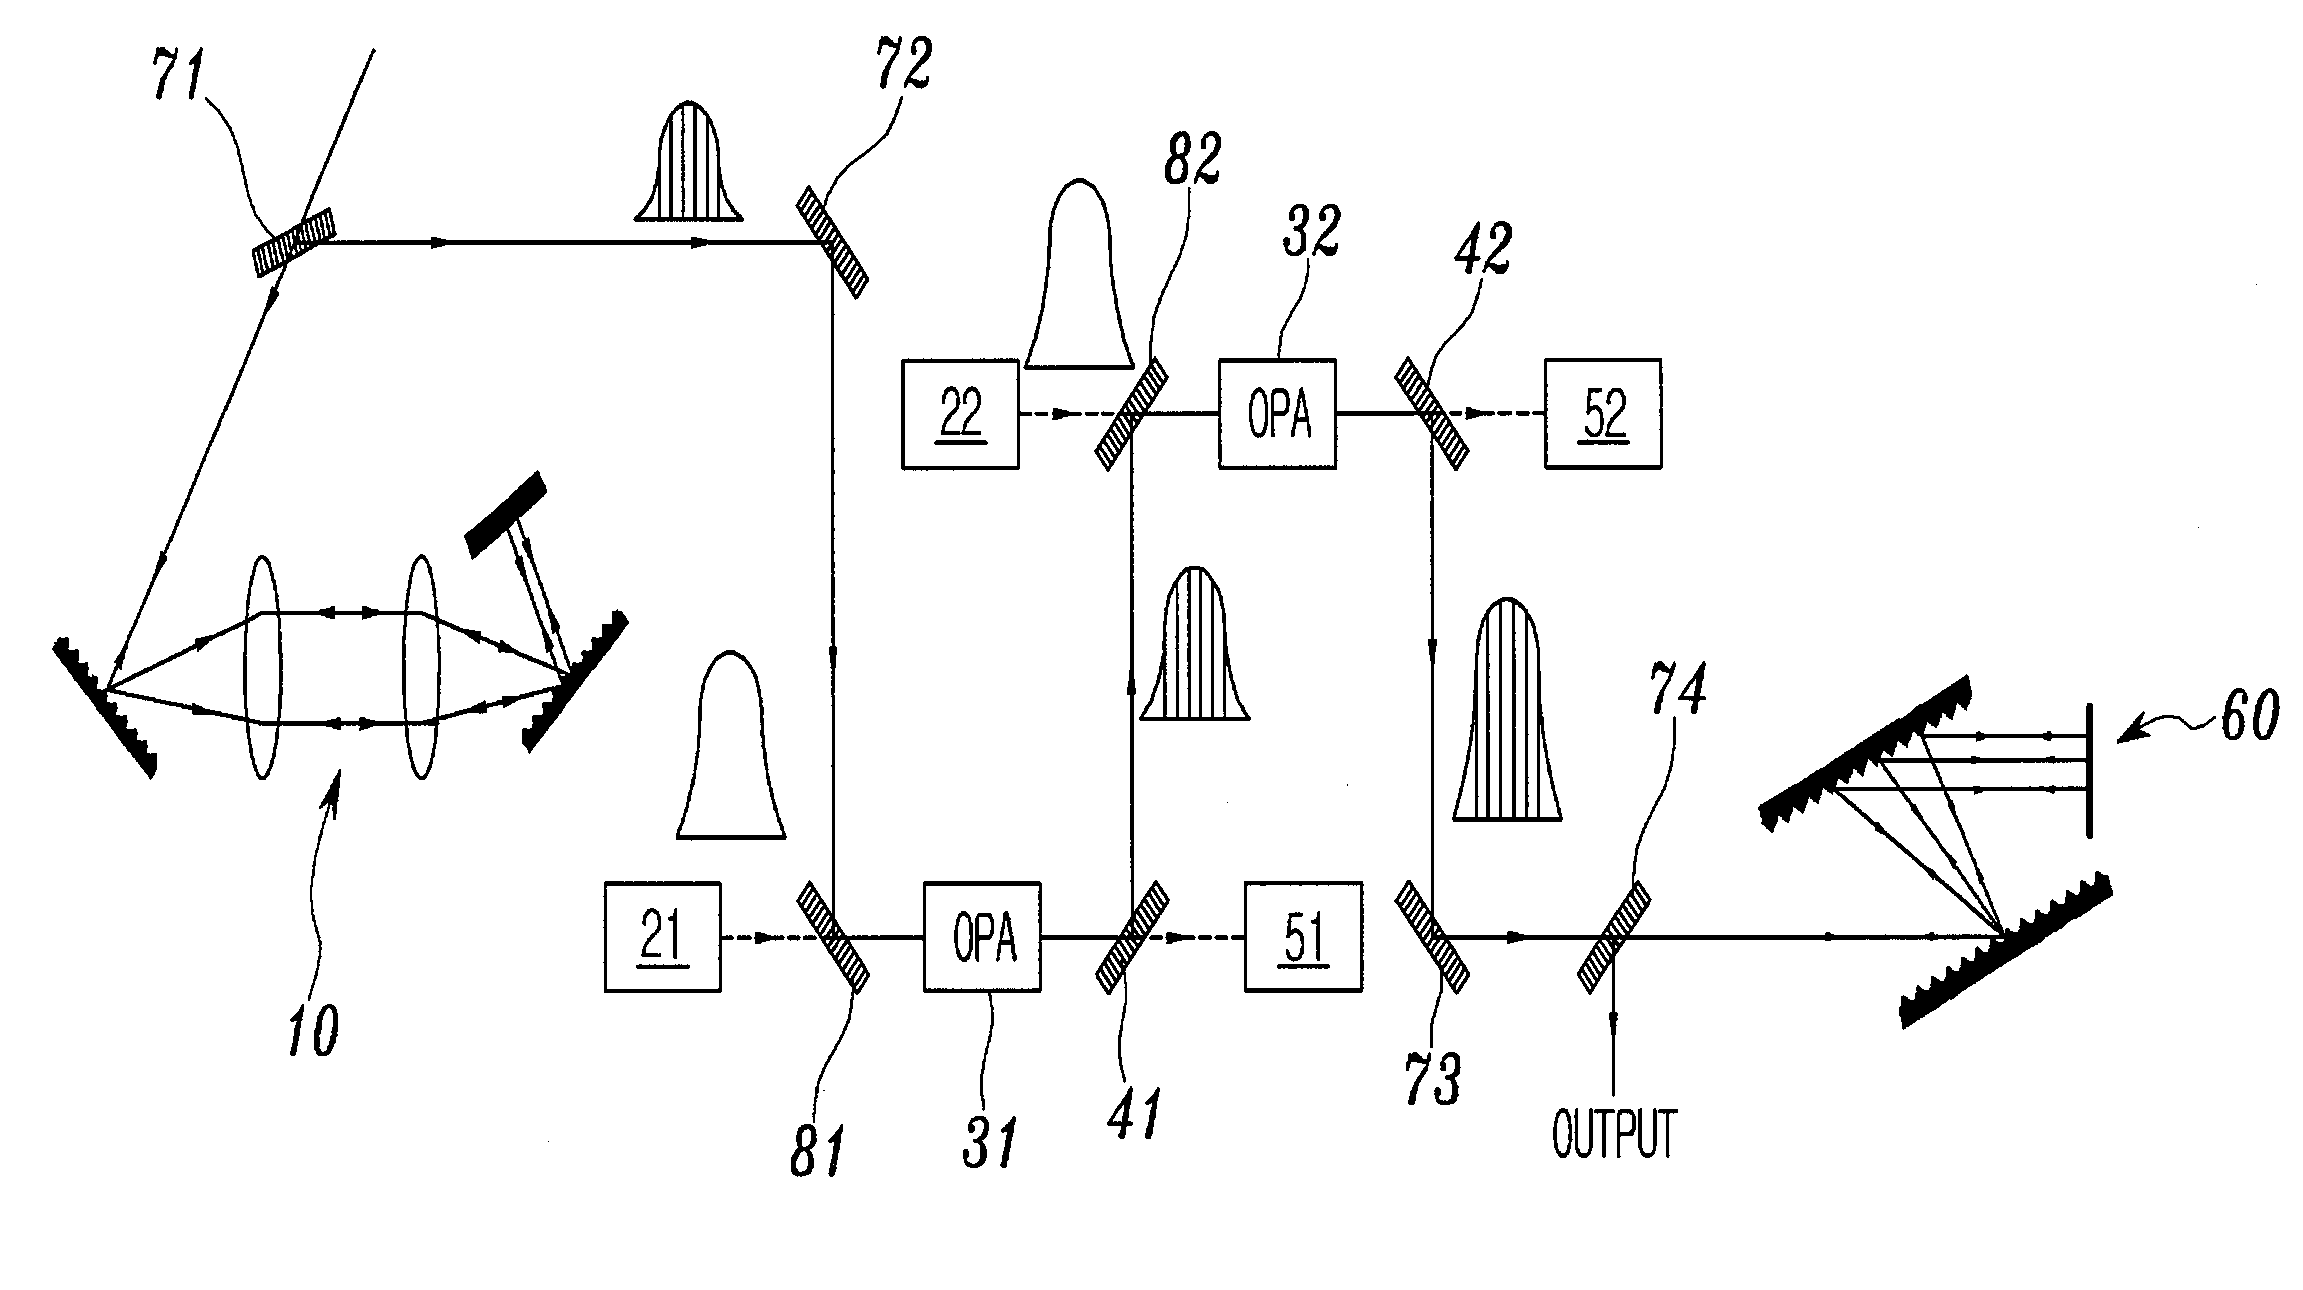 Apparatus for spectrum-doubled optical parametric chirped pulse amplification (OPCPA) using third-order dispersion chirping